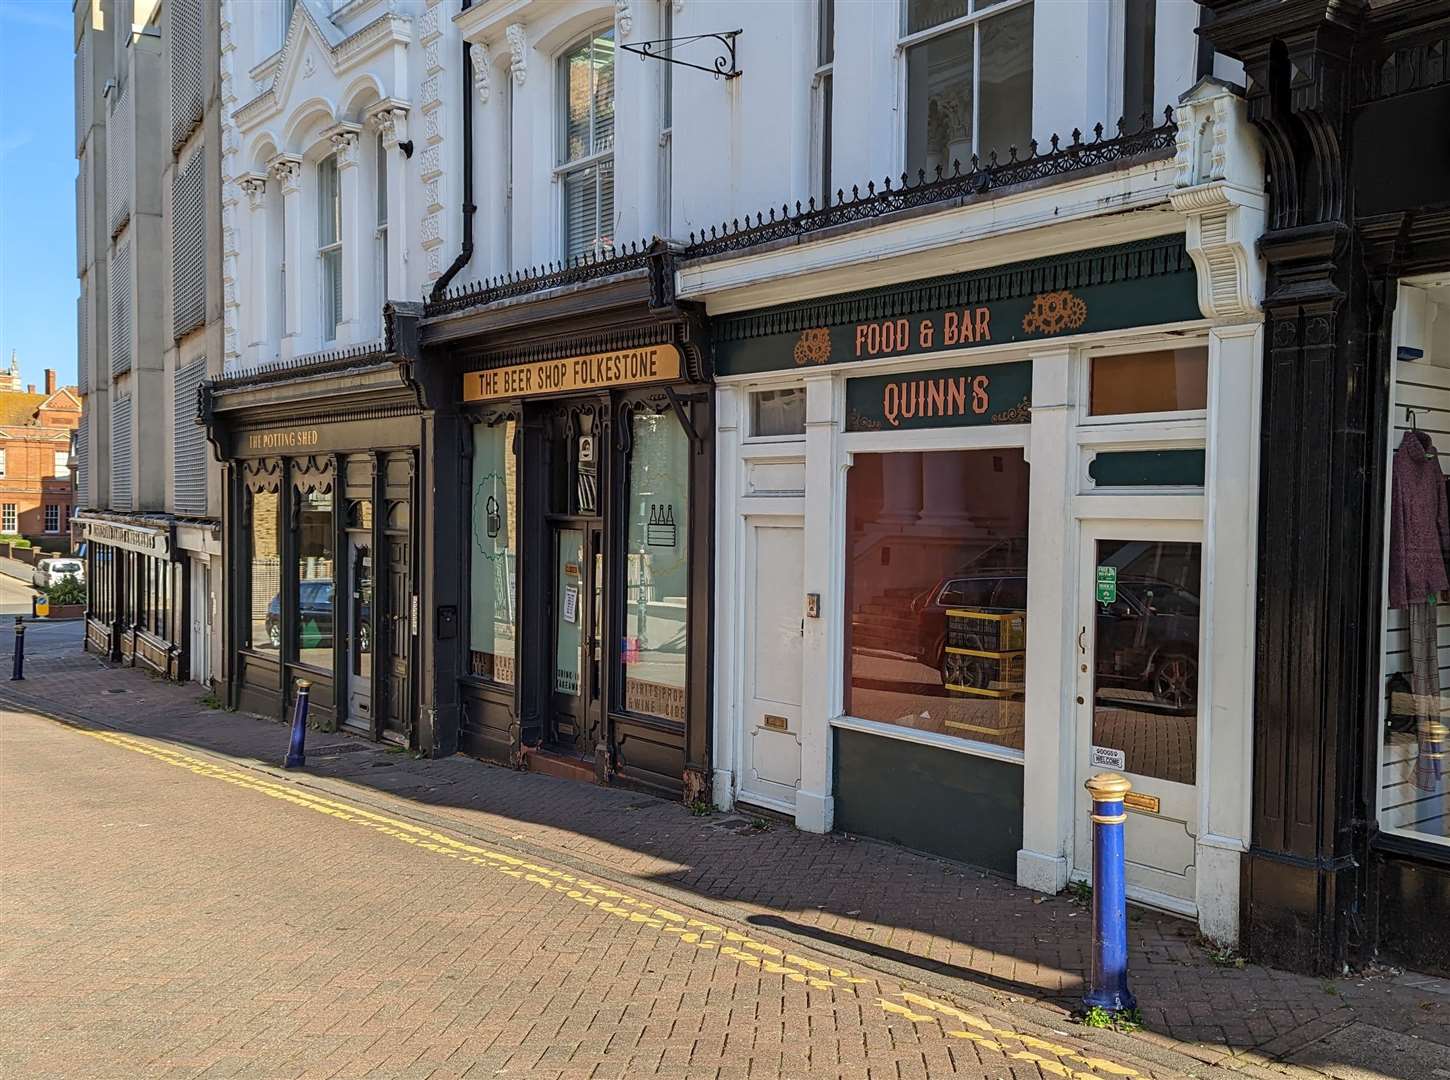 The Cabron Taqueria is a new Mexican restaurant which is set to open in Folkestone